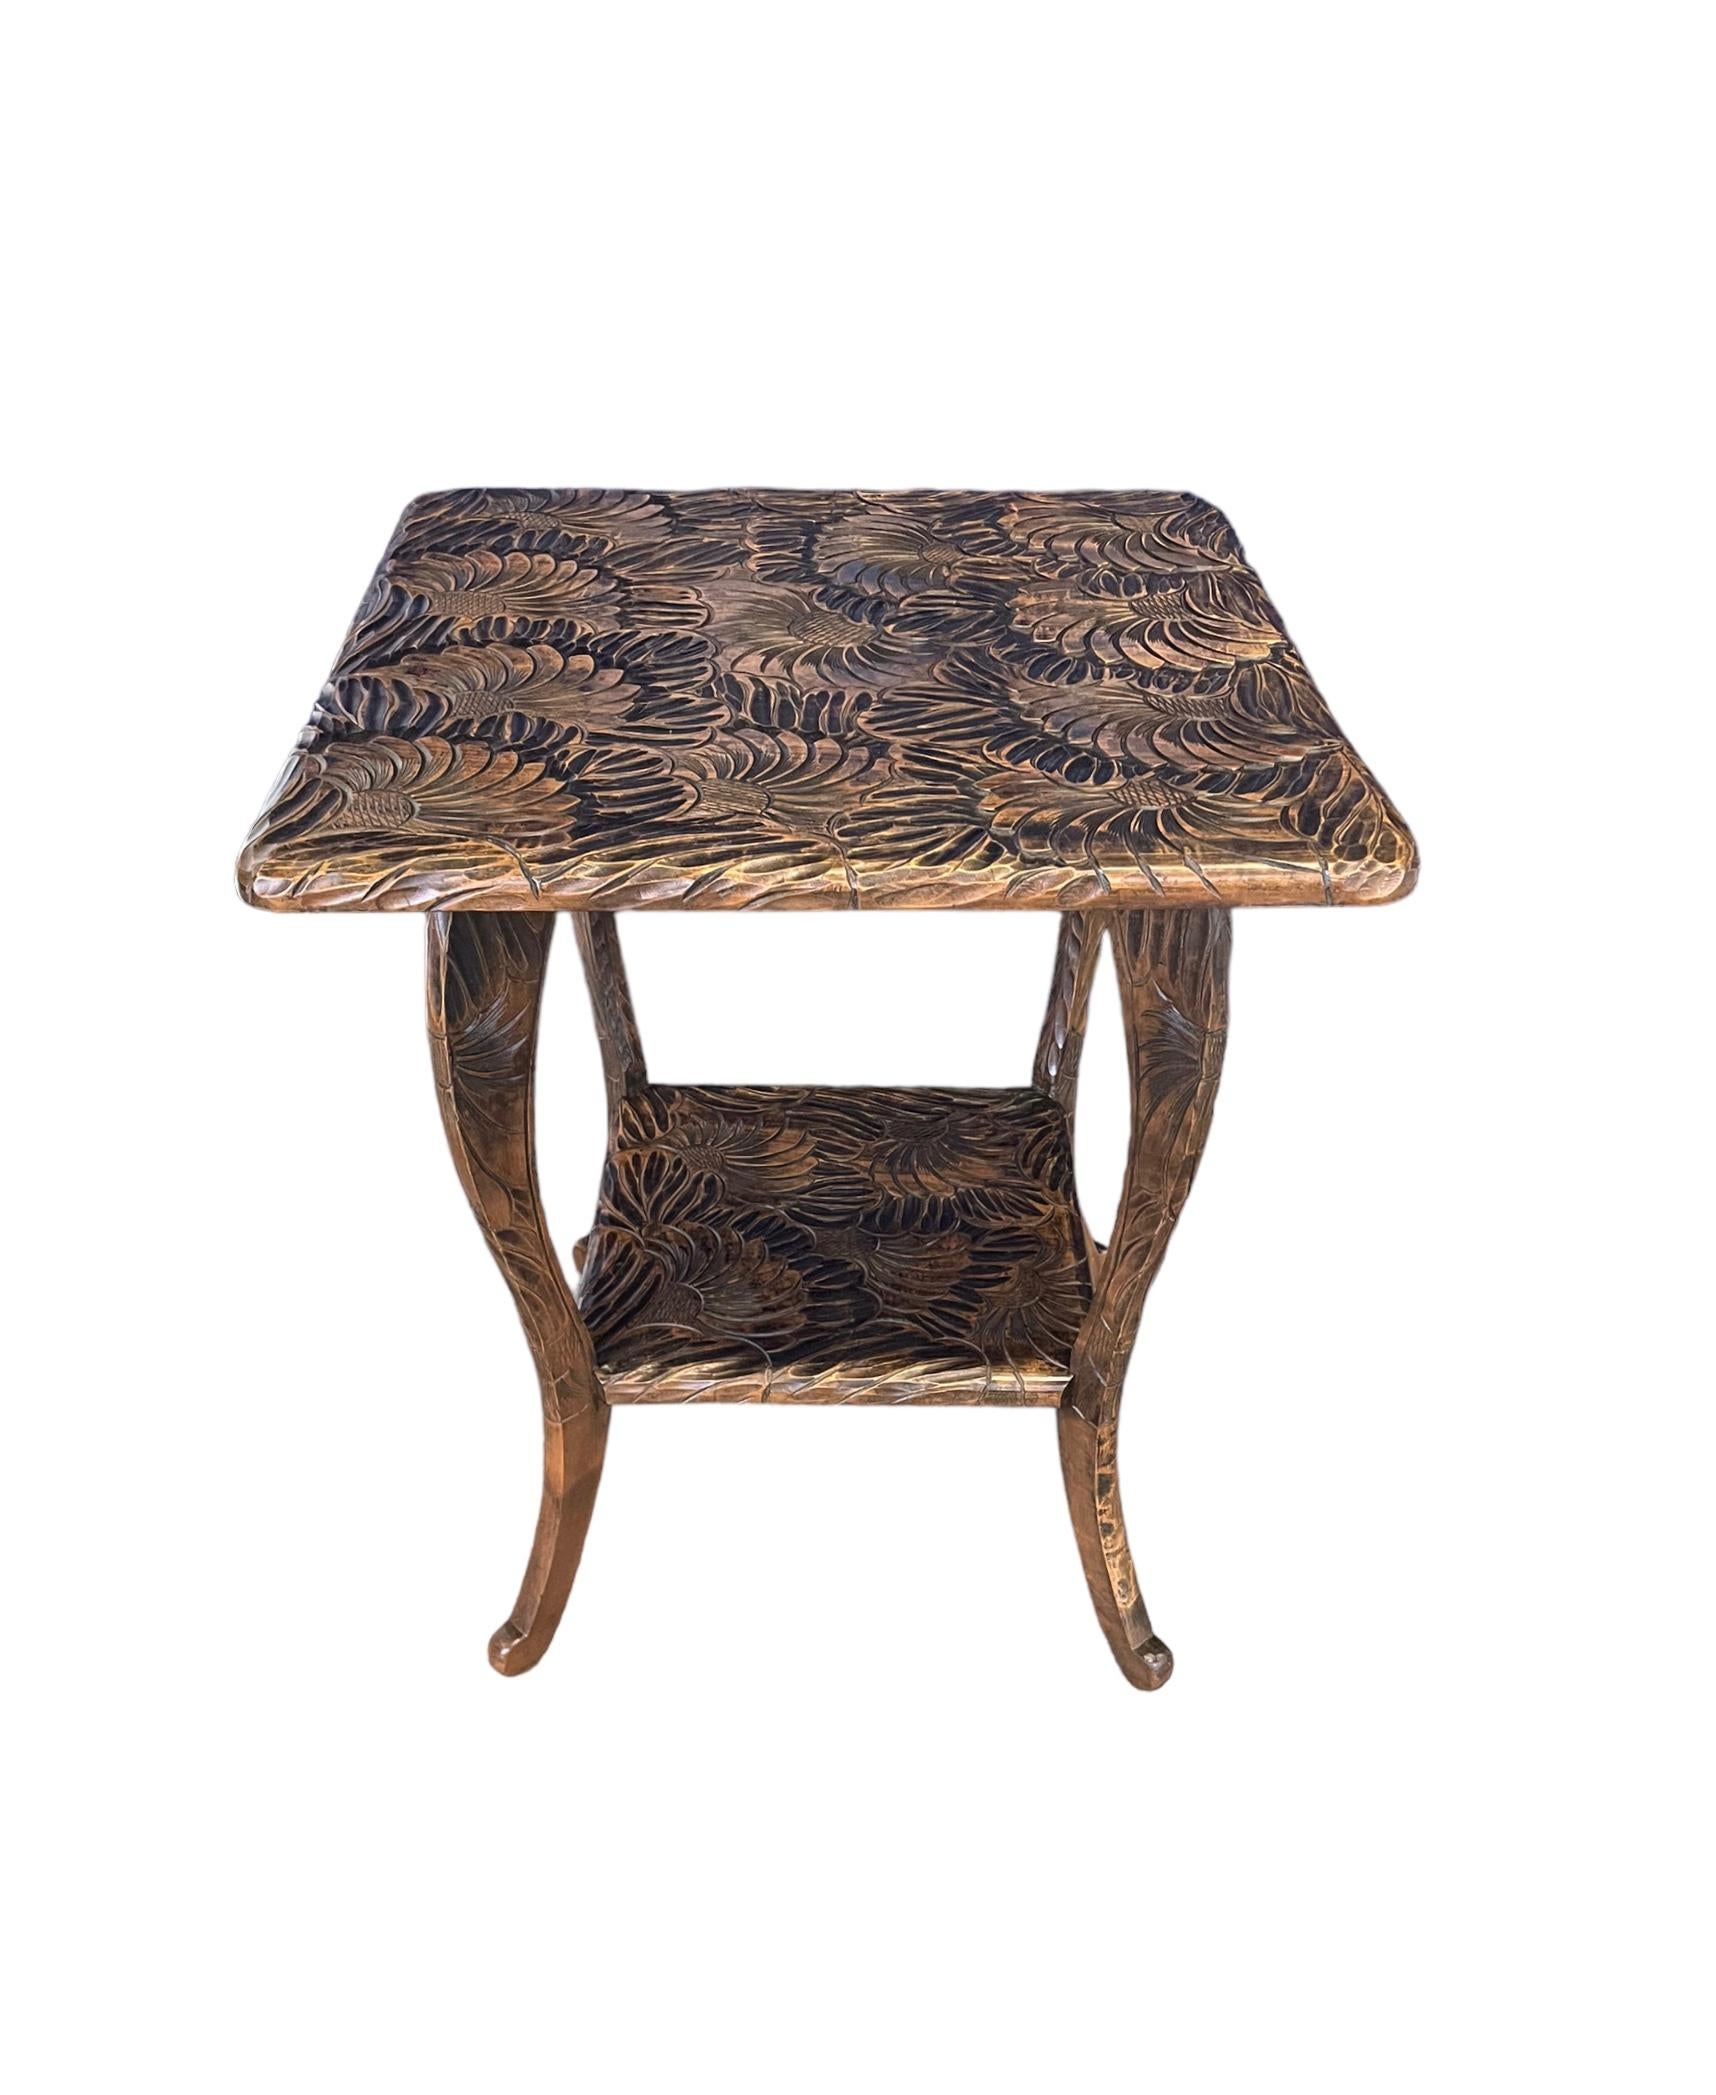 Early 20th Century Arts & Crafts Japanese Table retailed by Liberty and Co. For Sale